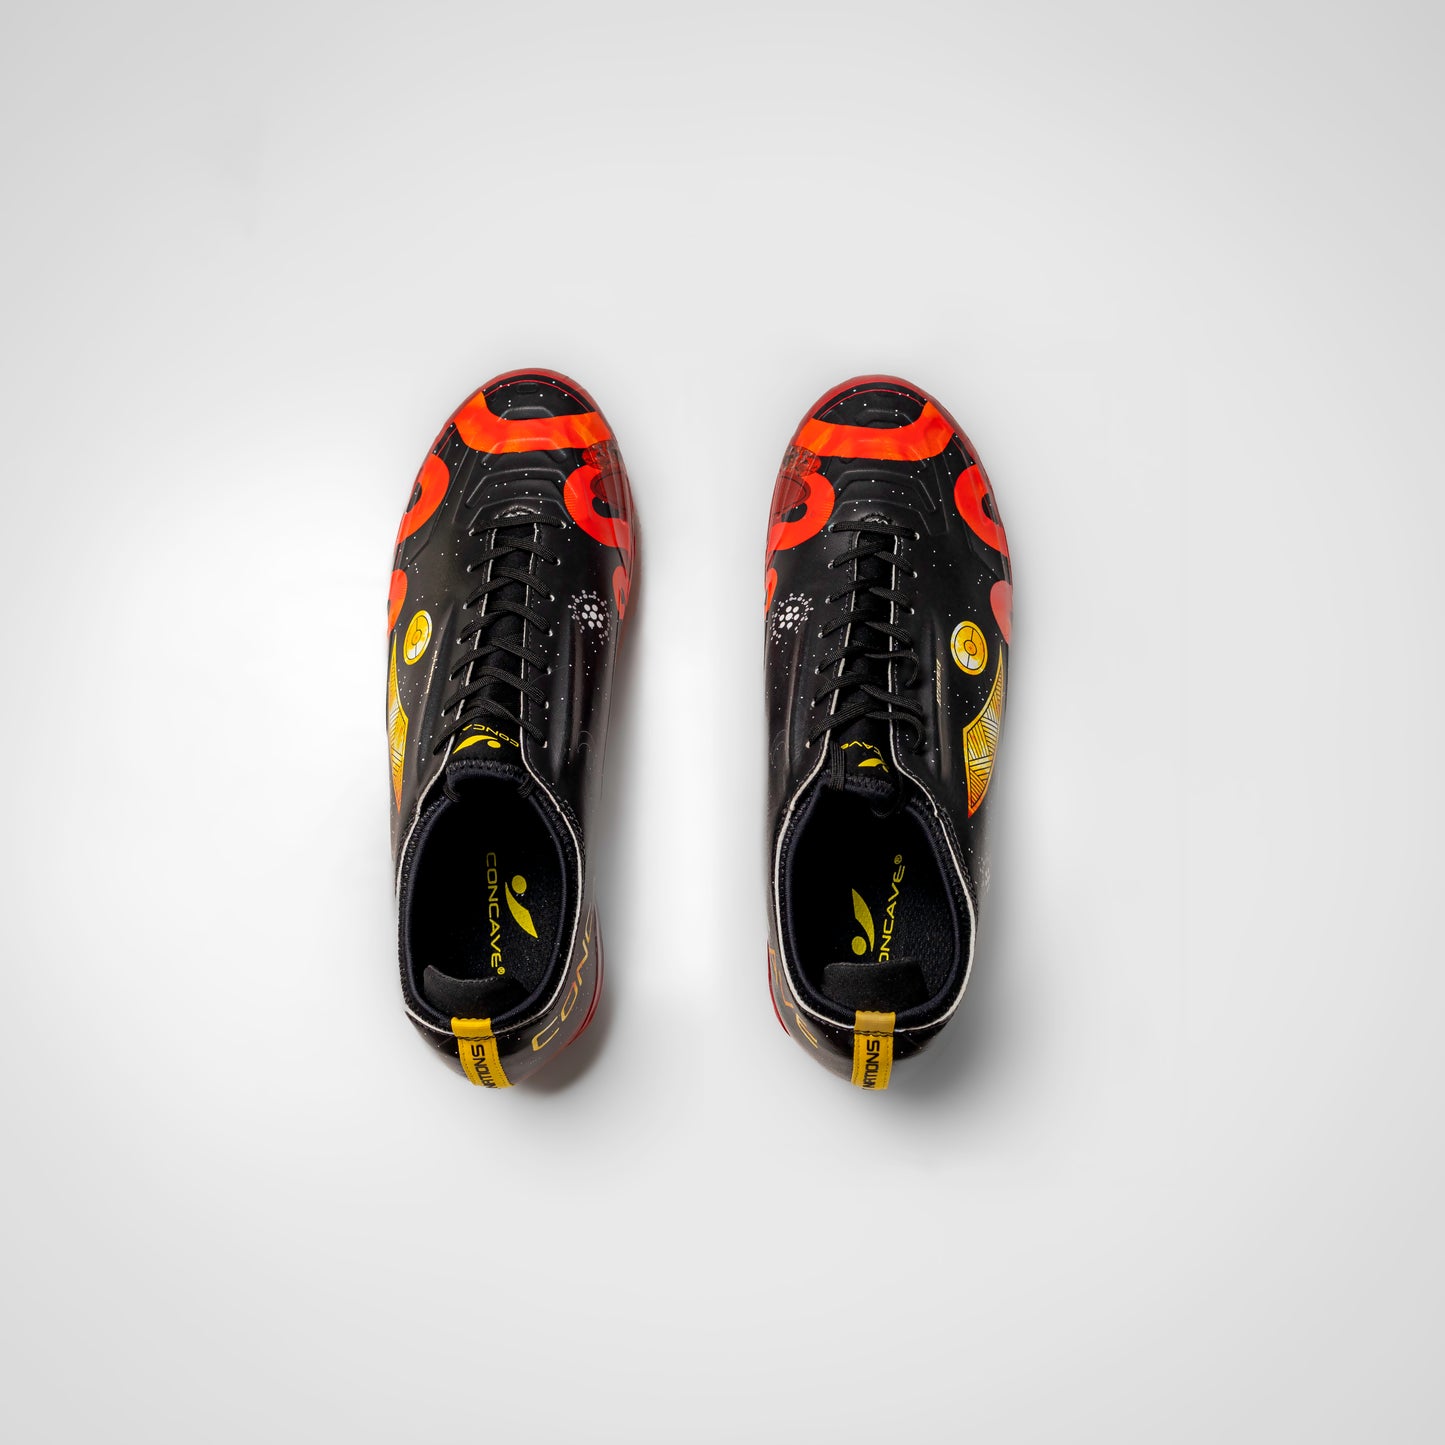 Concave Kids First Nations v1 FG - Black/Red/Yellow